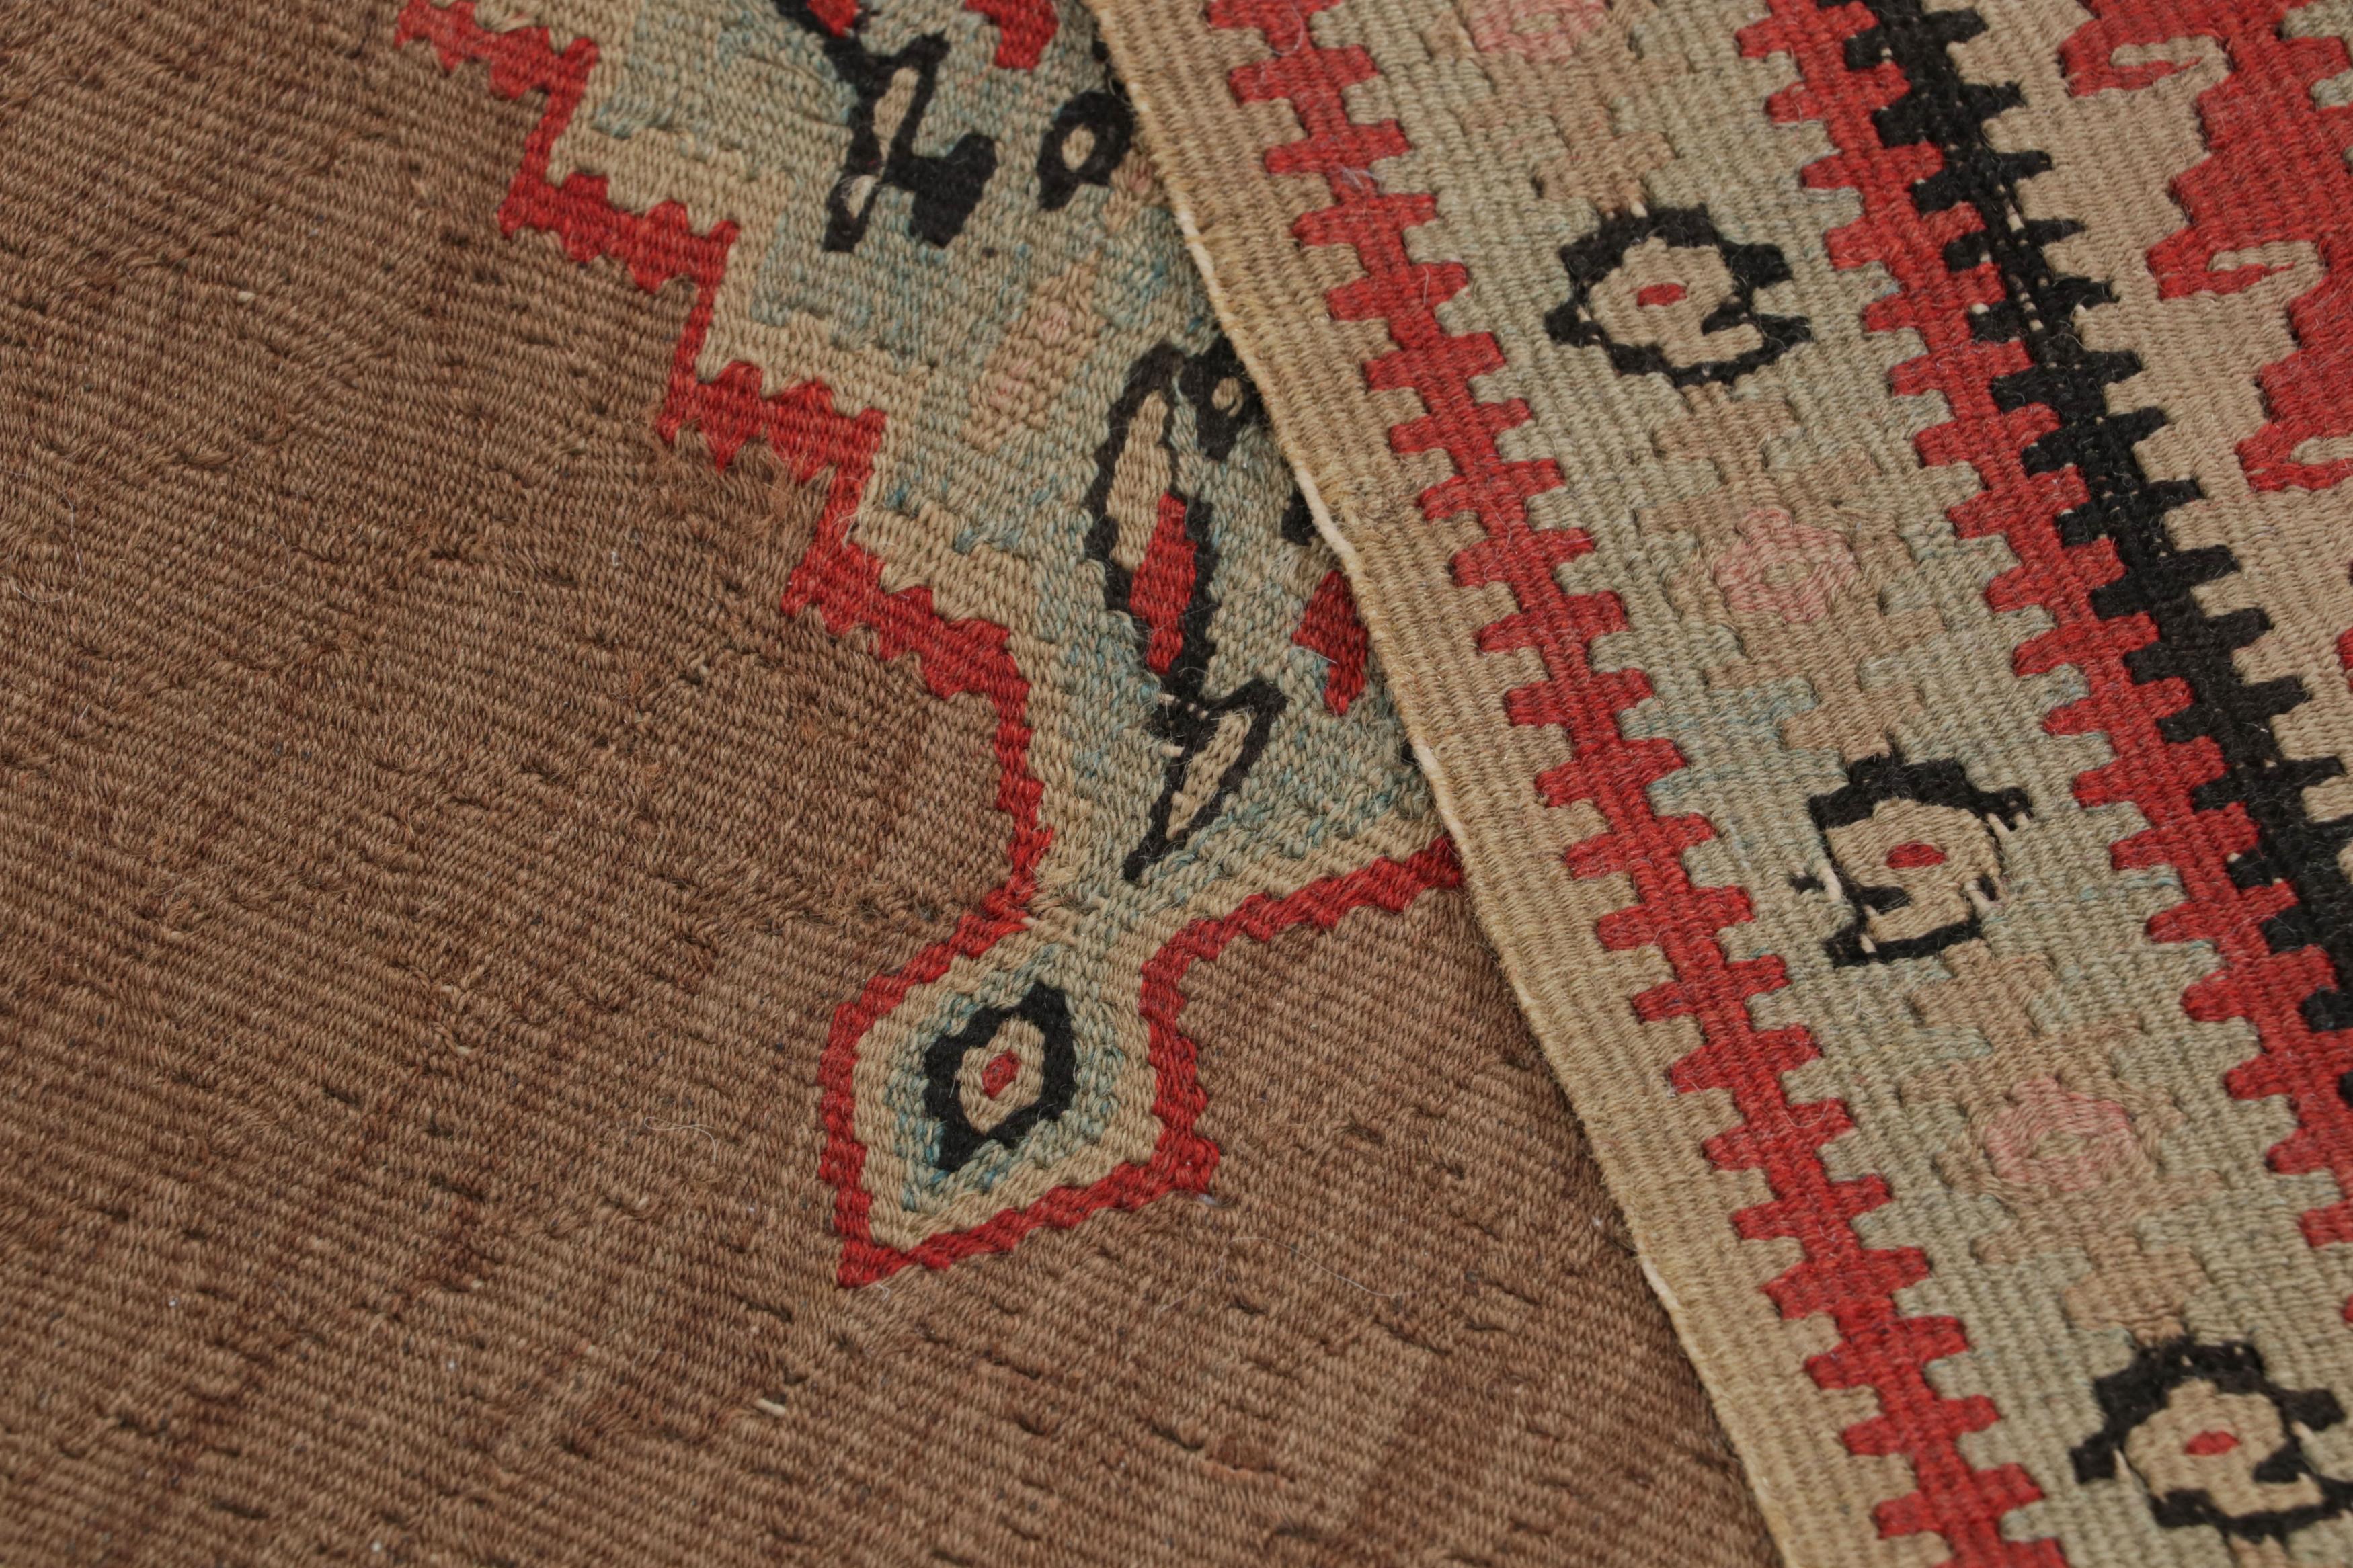 Antique Geometric Beige and Red Wool Persian Kilim-Senneh Runner by Rug & Kilim For Sale 2